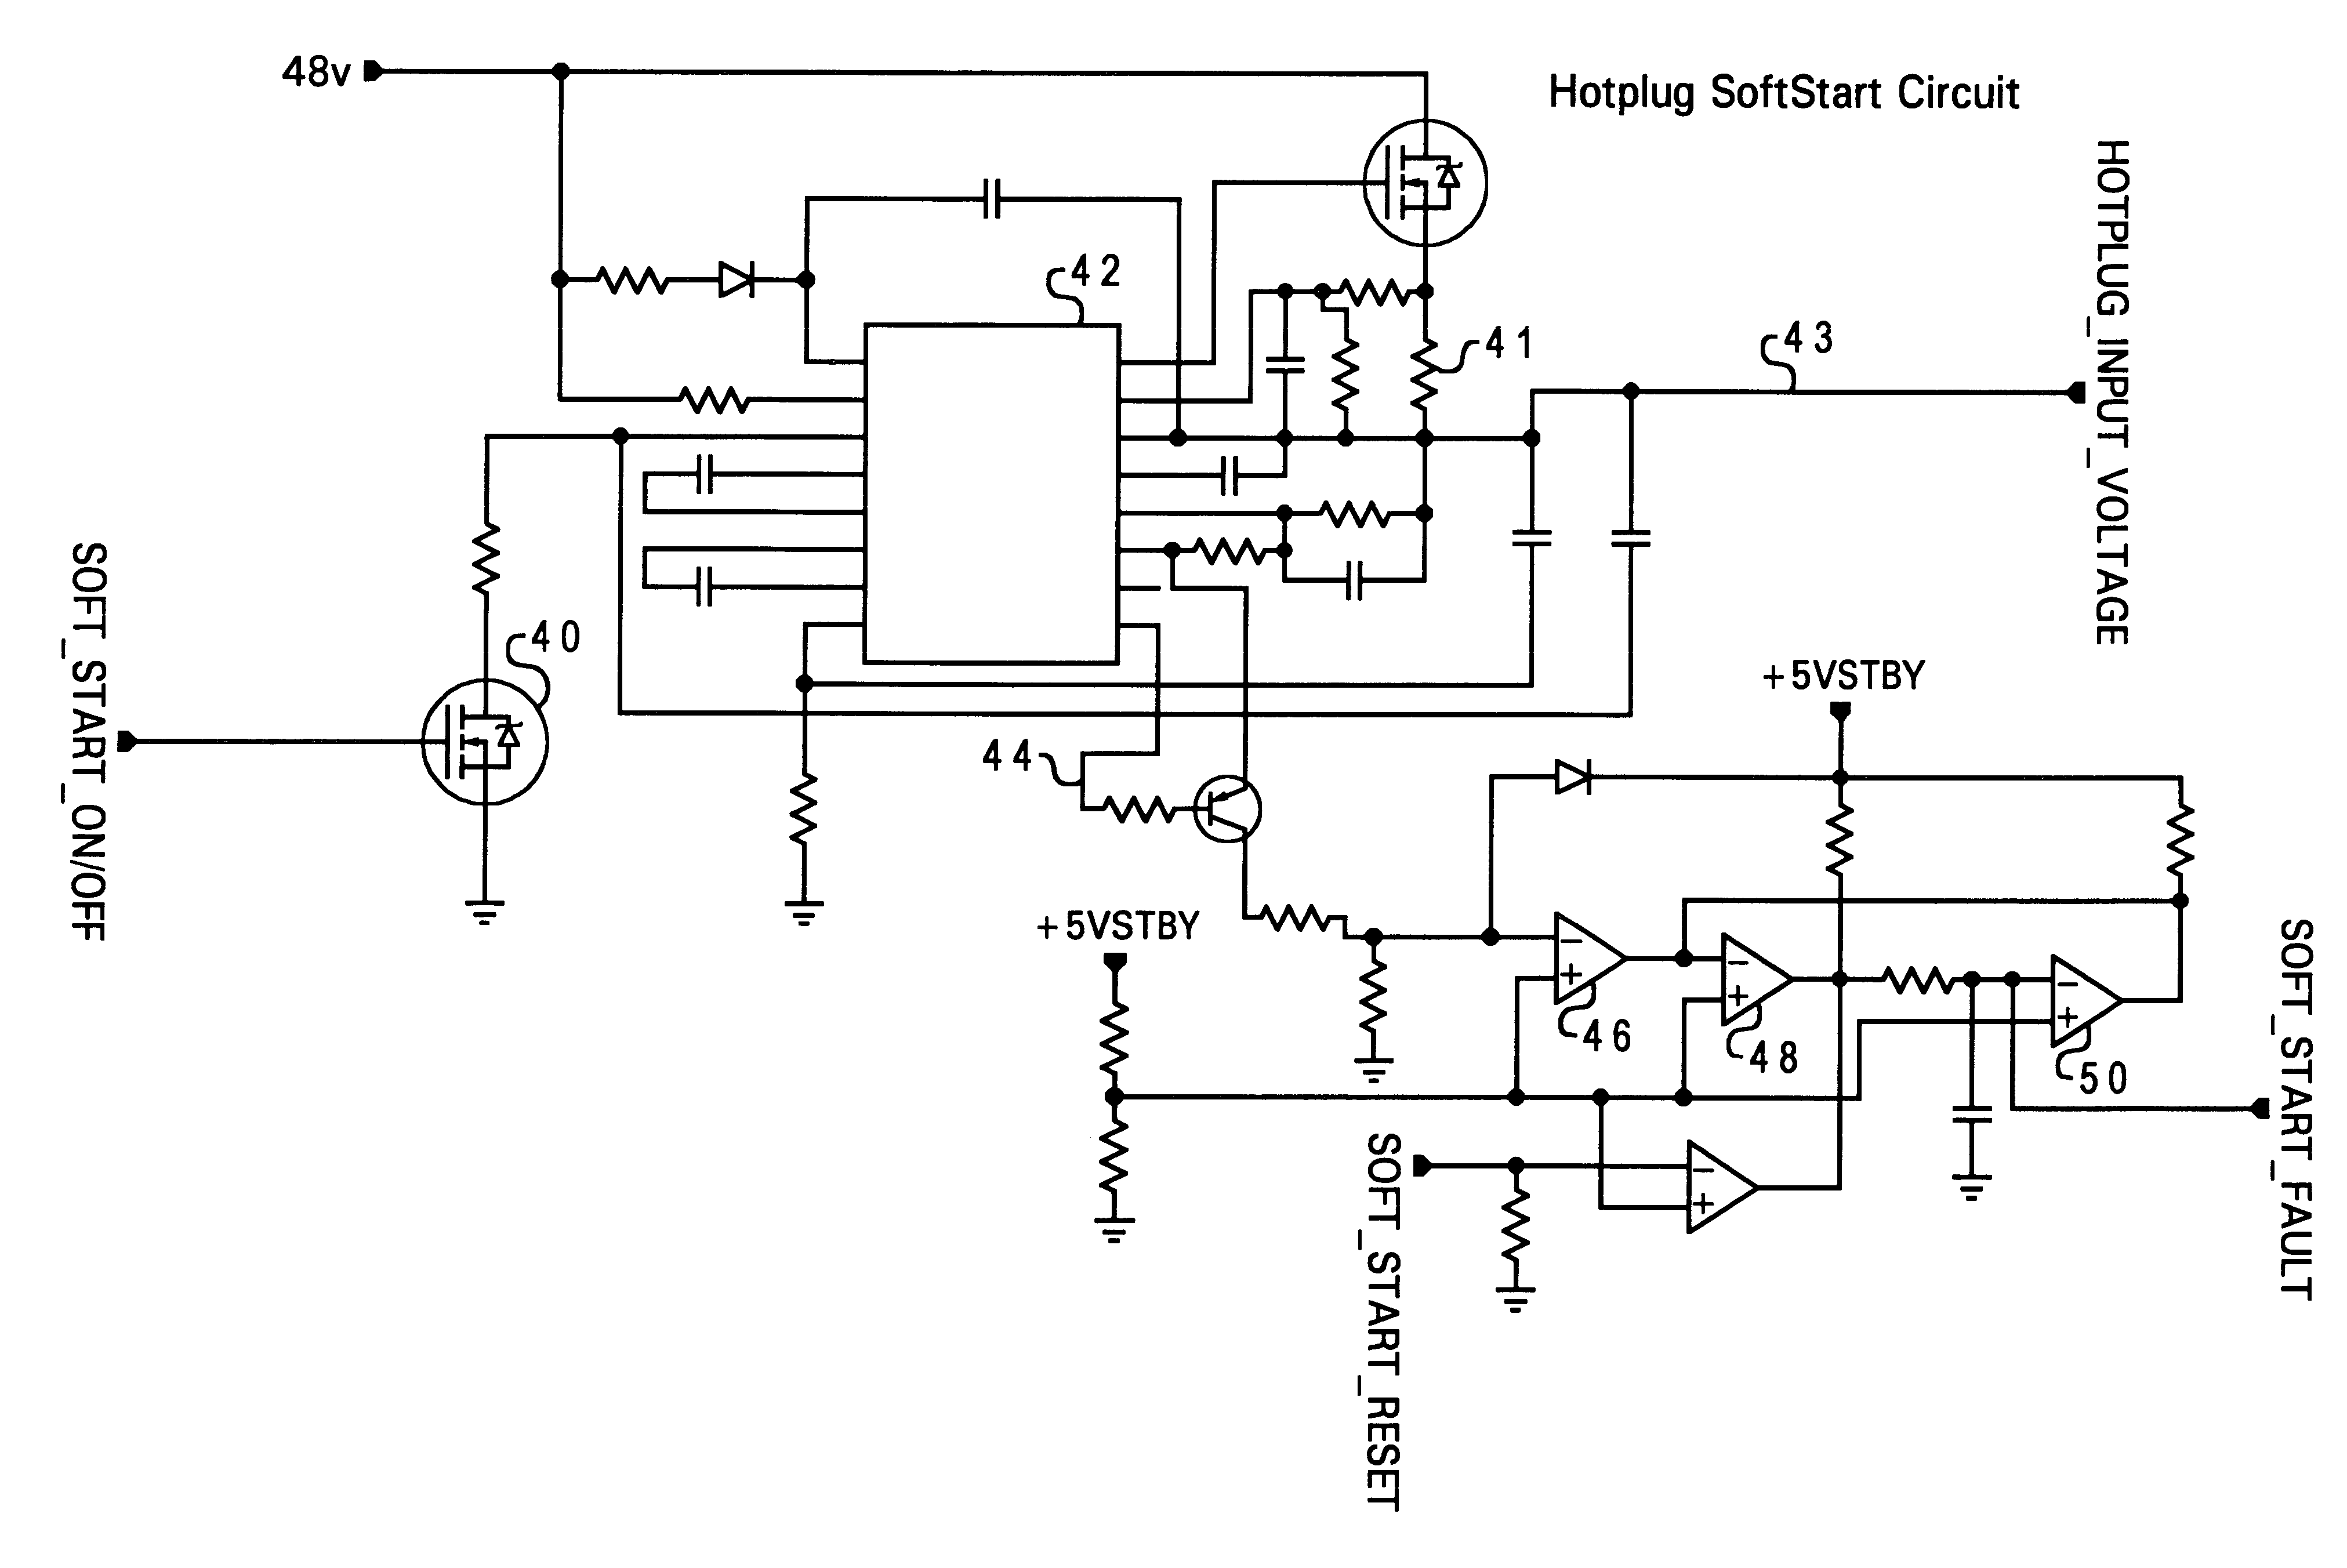 Hot plug control of MP based computer system